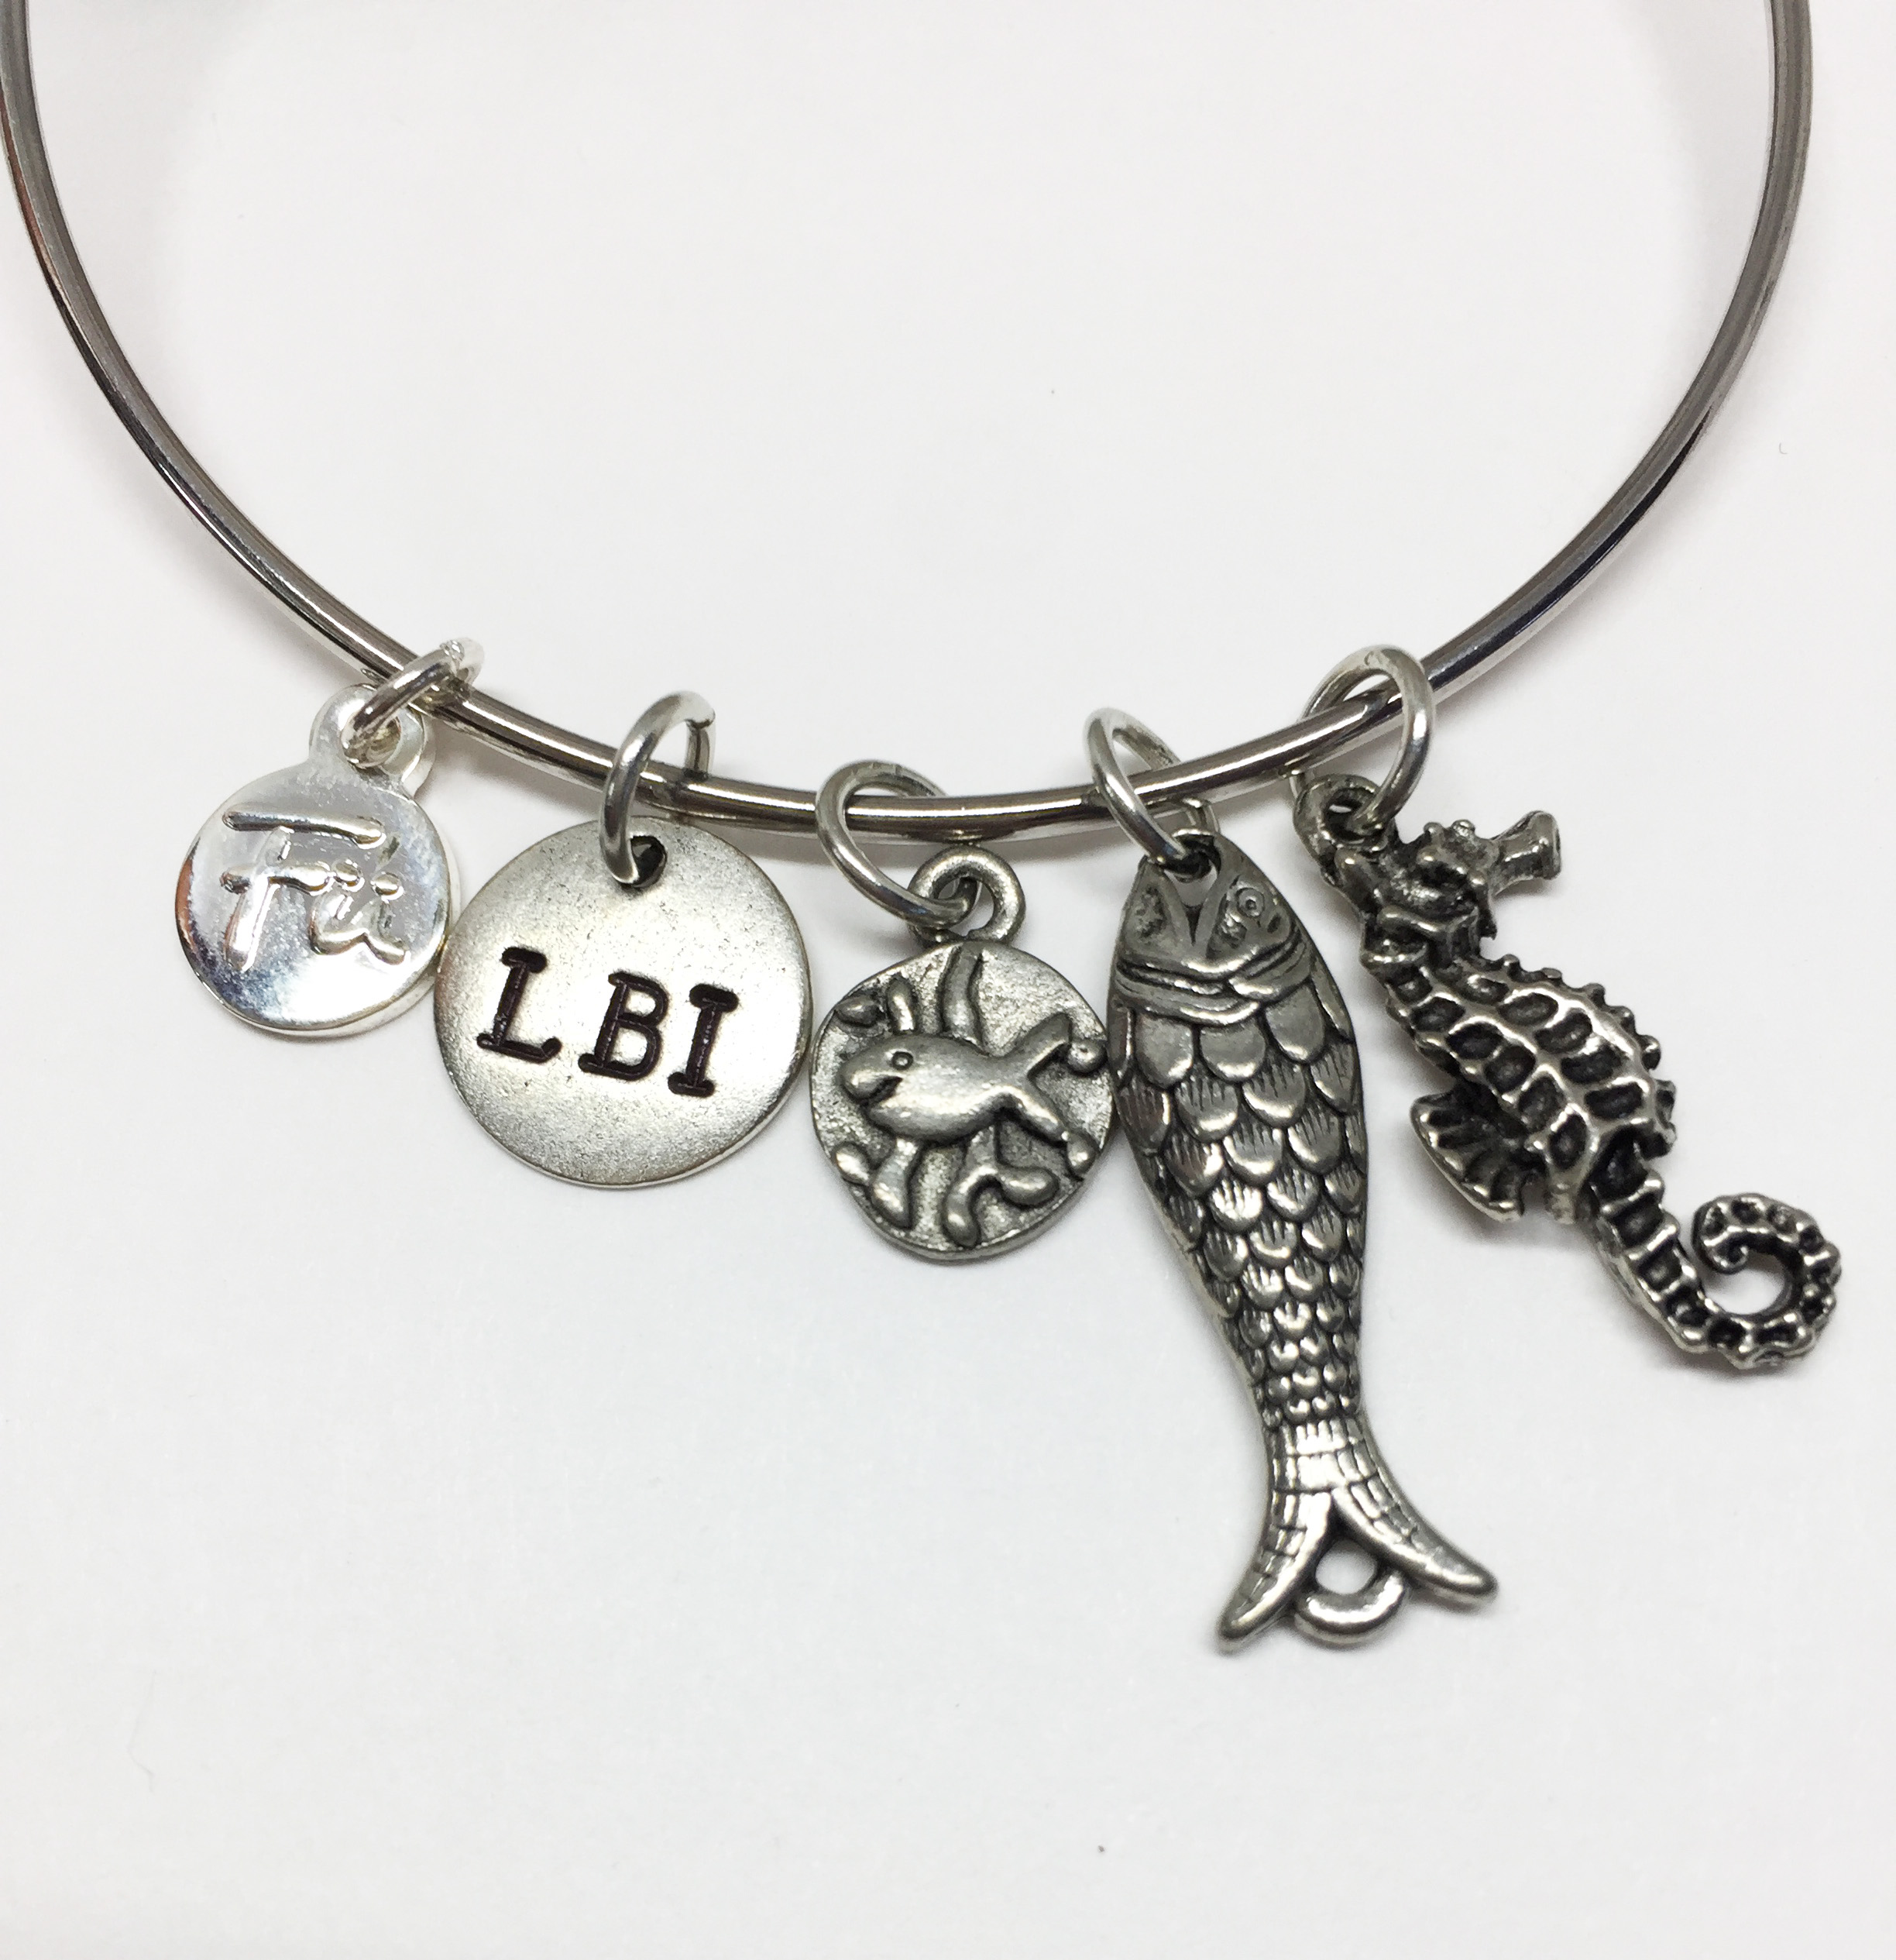 Ocean Creatures Charm Bracelet - Sterling Silver Bracelet with Sea Life Charms